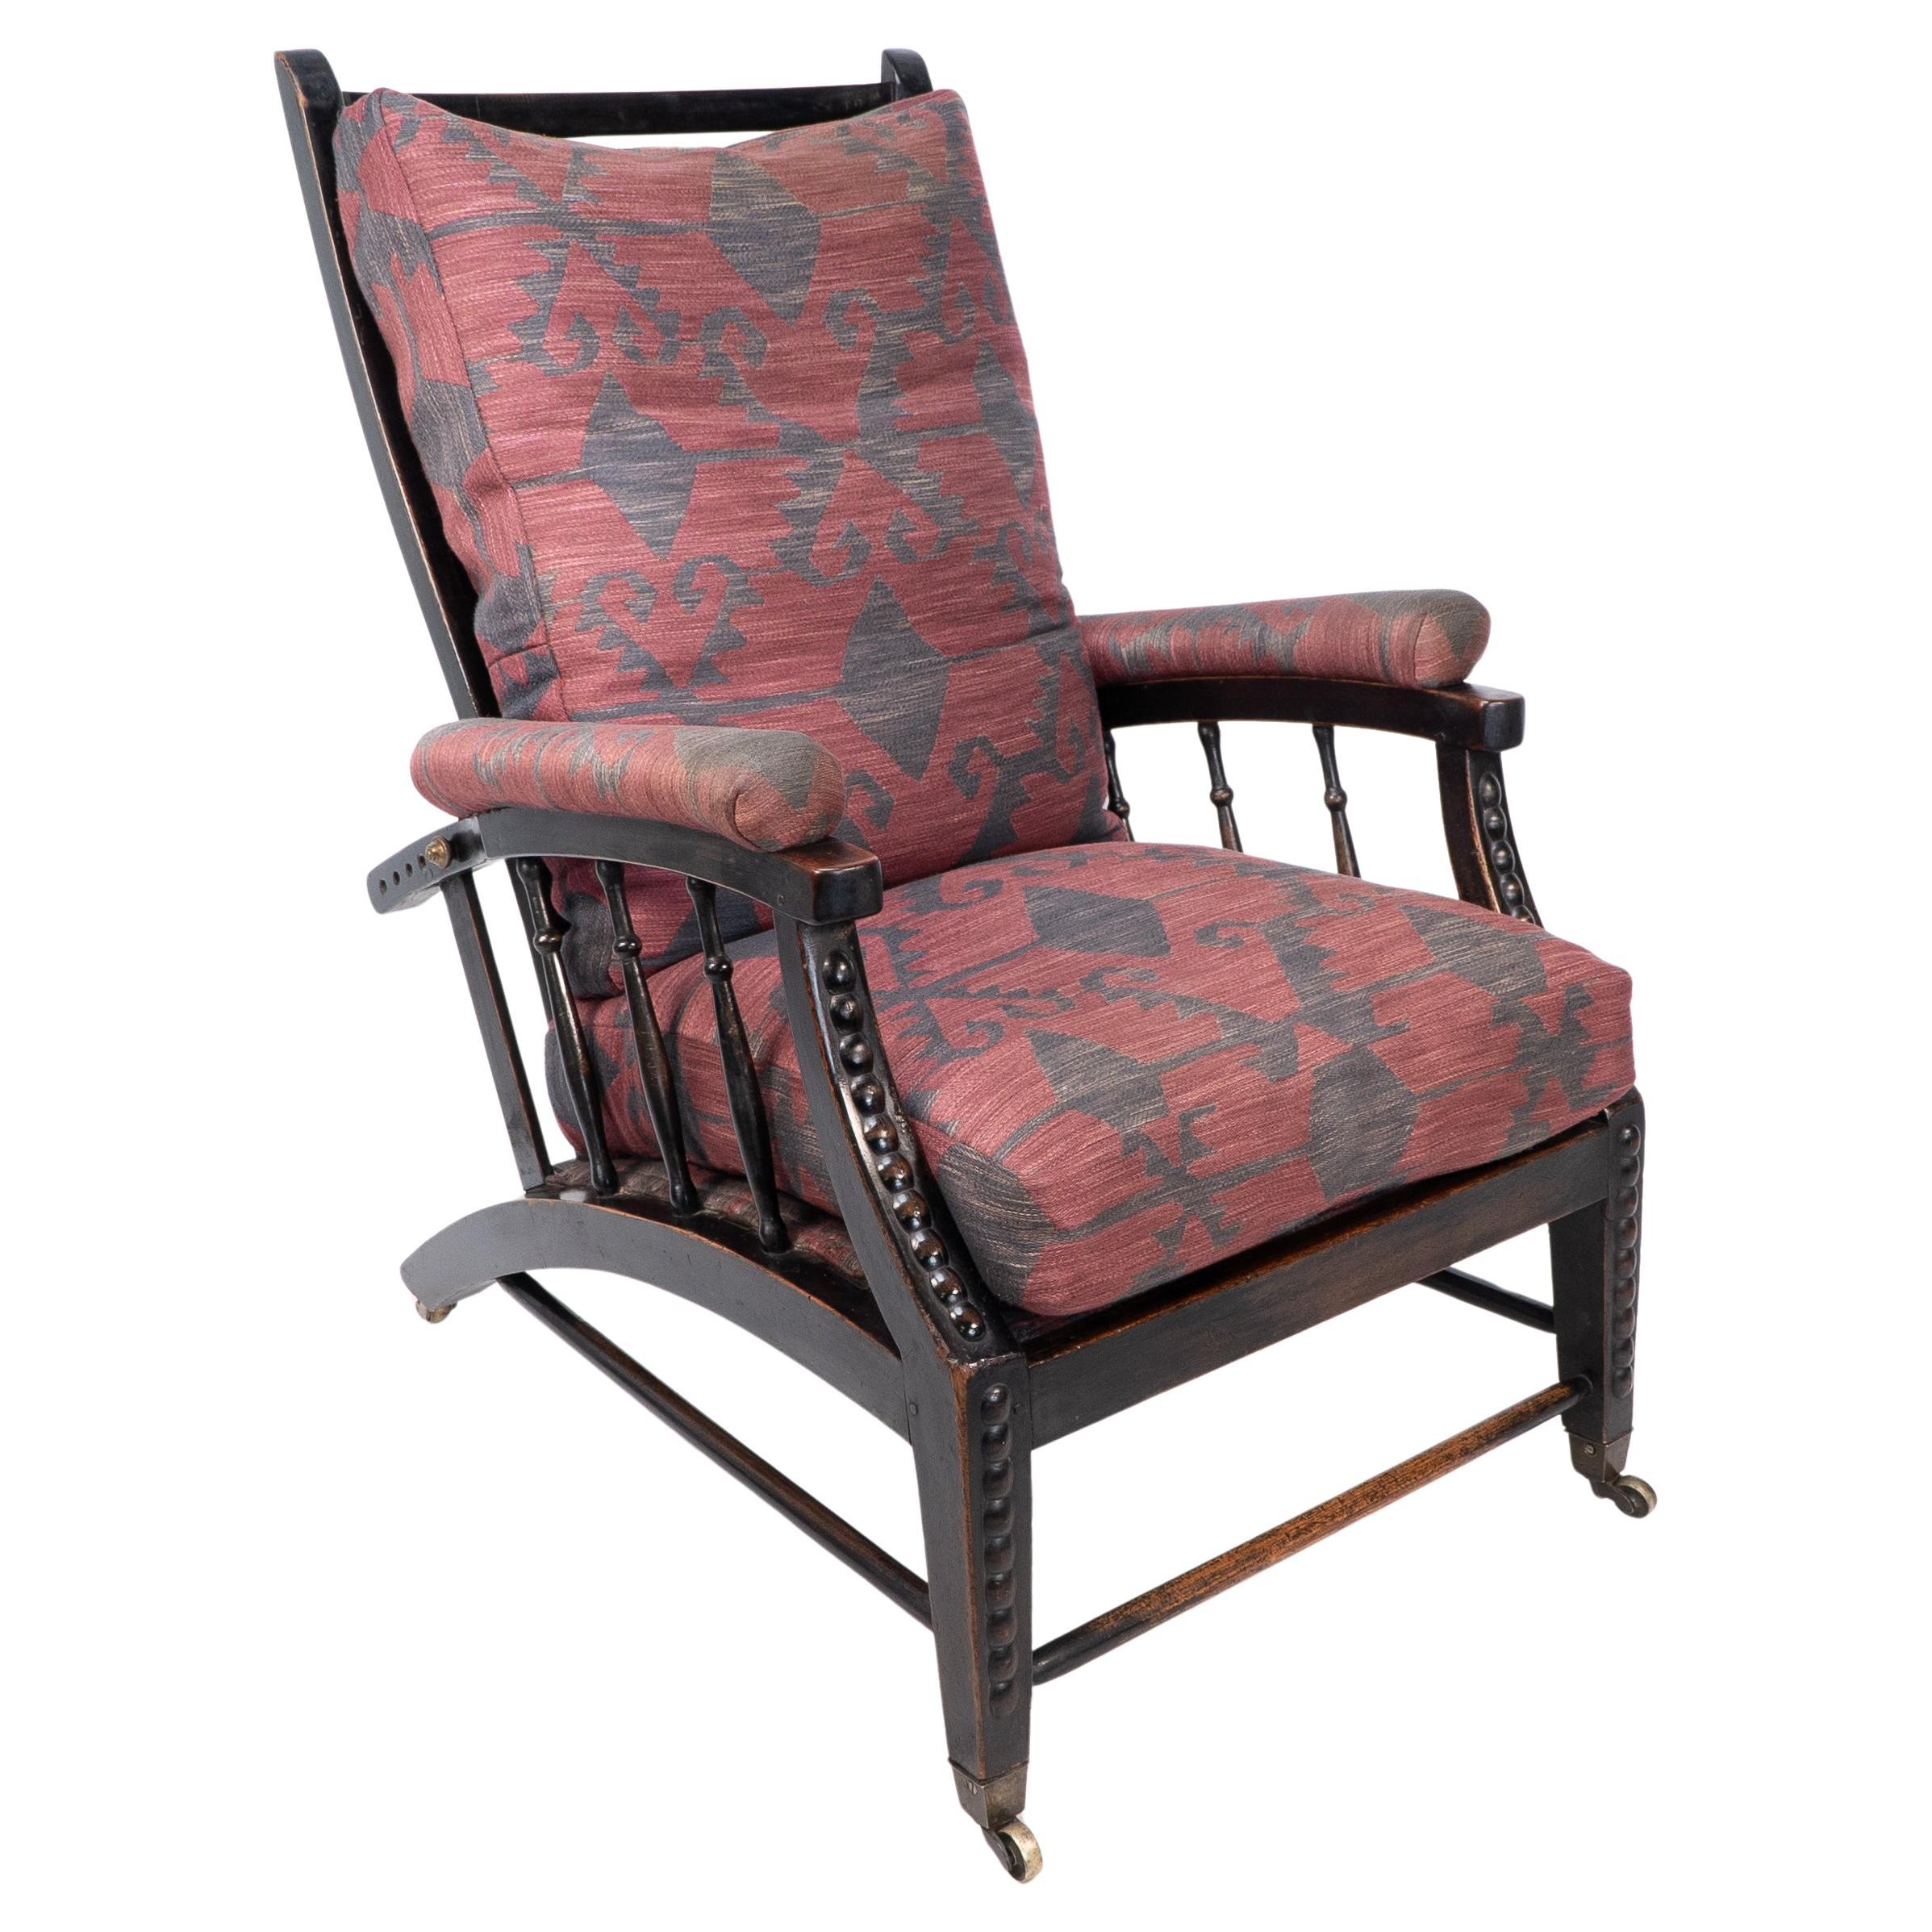 Phillip Webb for Morris & Co. an English Aesthetic Movement Reclining Armchair For Sale